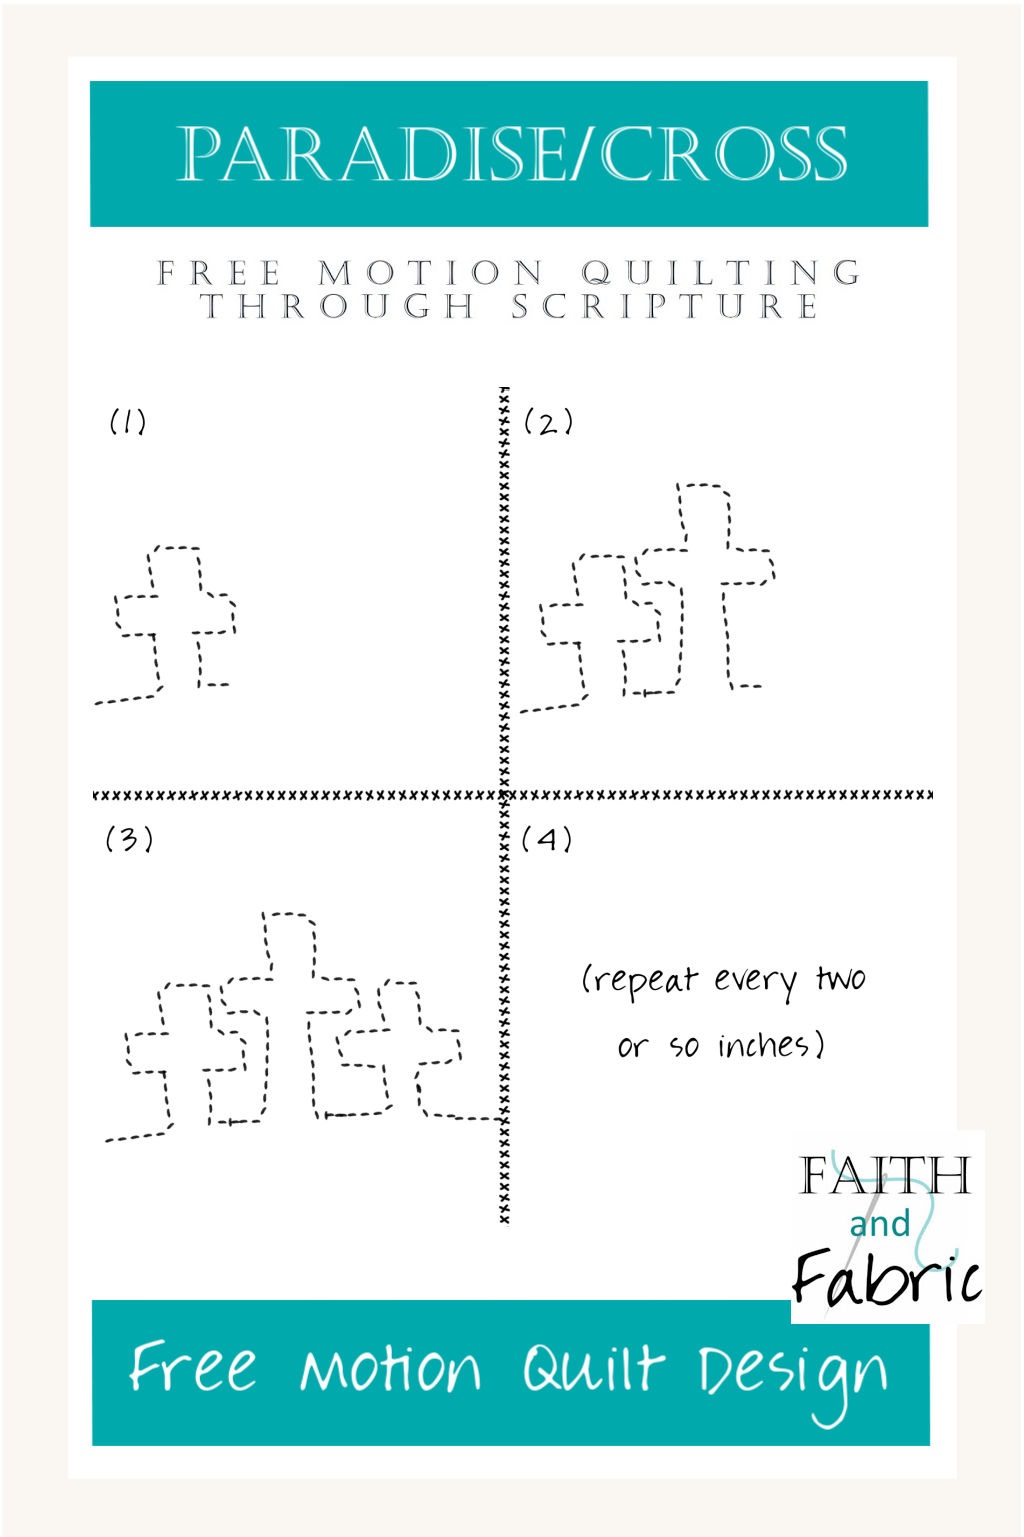 Create a free motion quilt design of the most iconic Christian image: the cross. This basic three cross free motion quilt design would be beautiful in wide quilt borders in a contrasting thread!